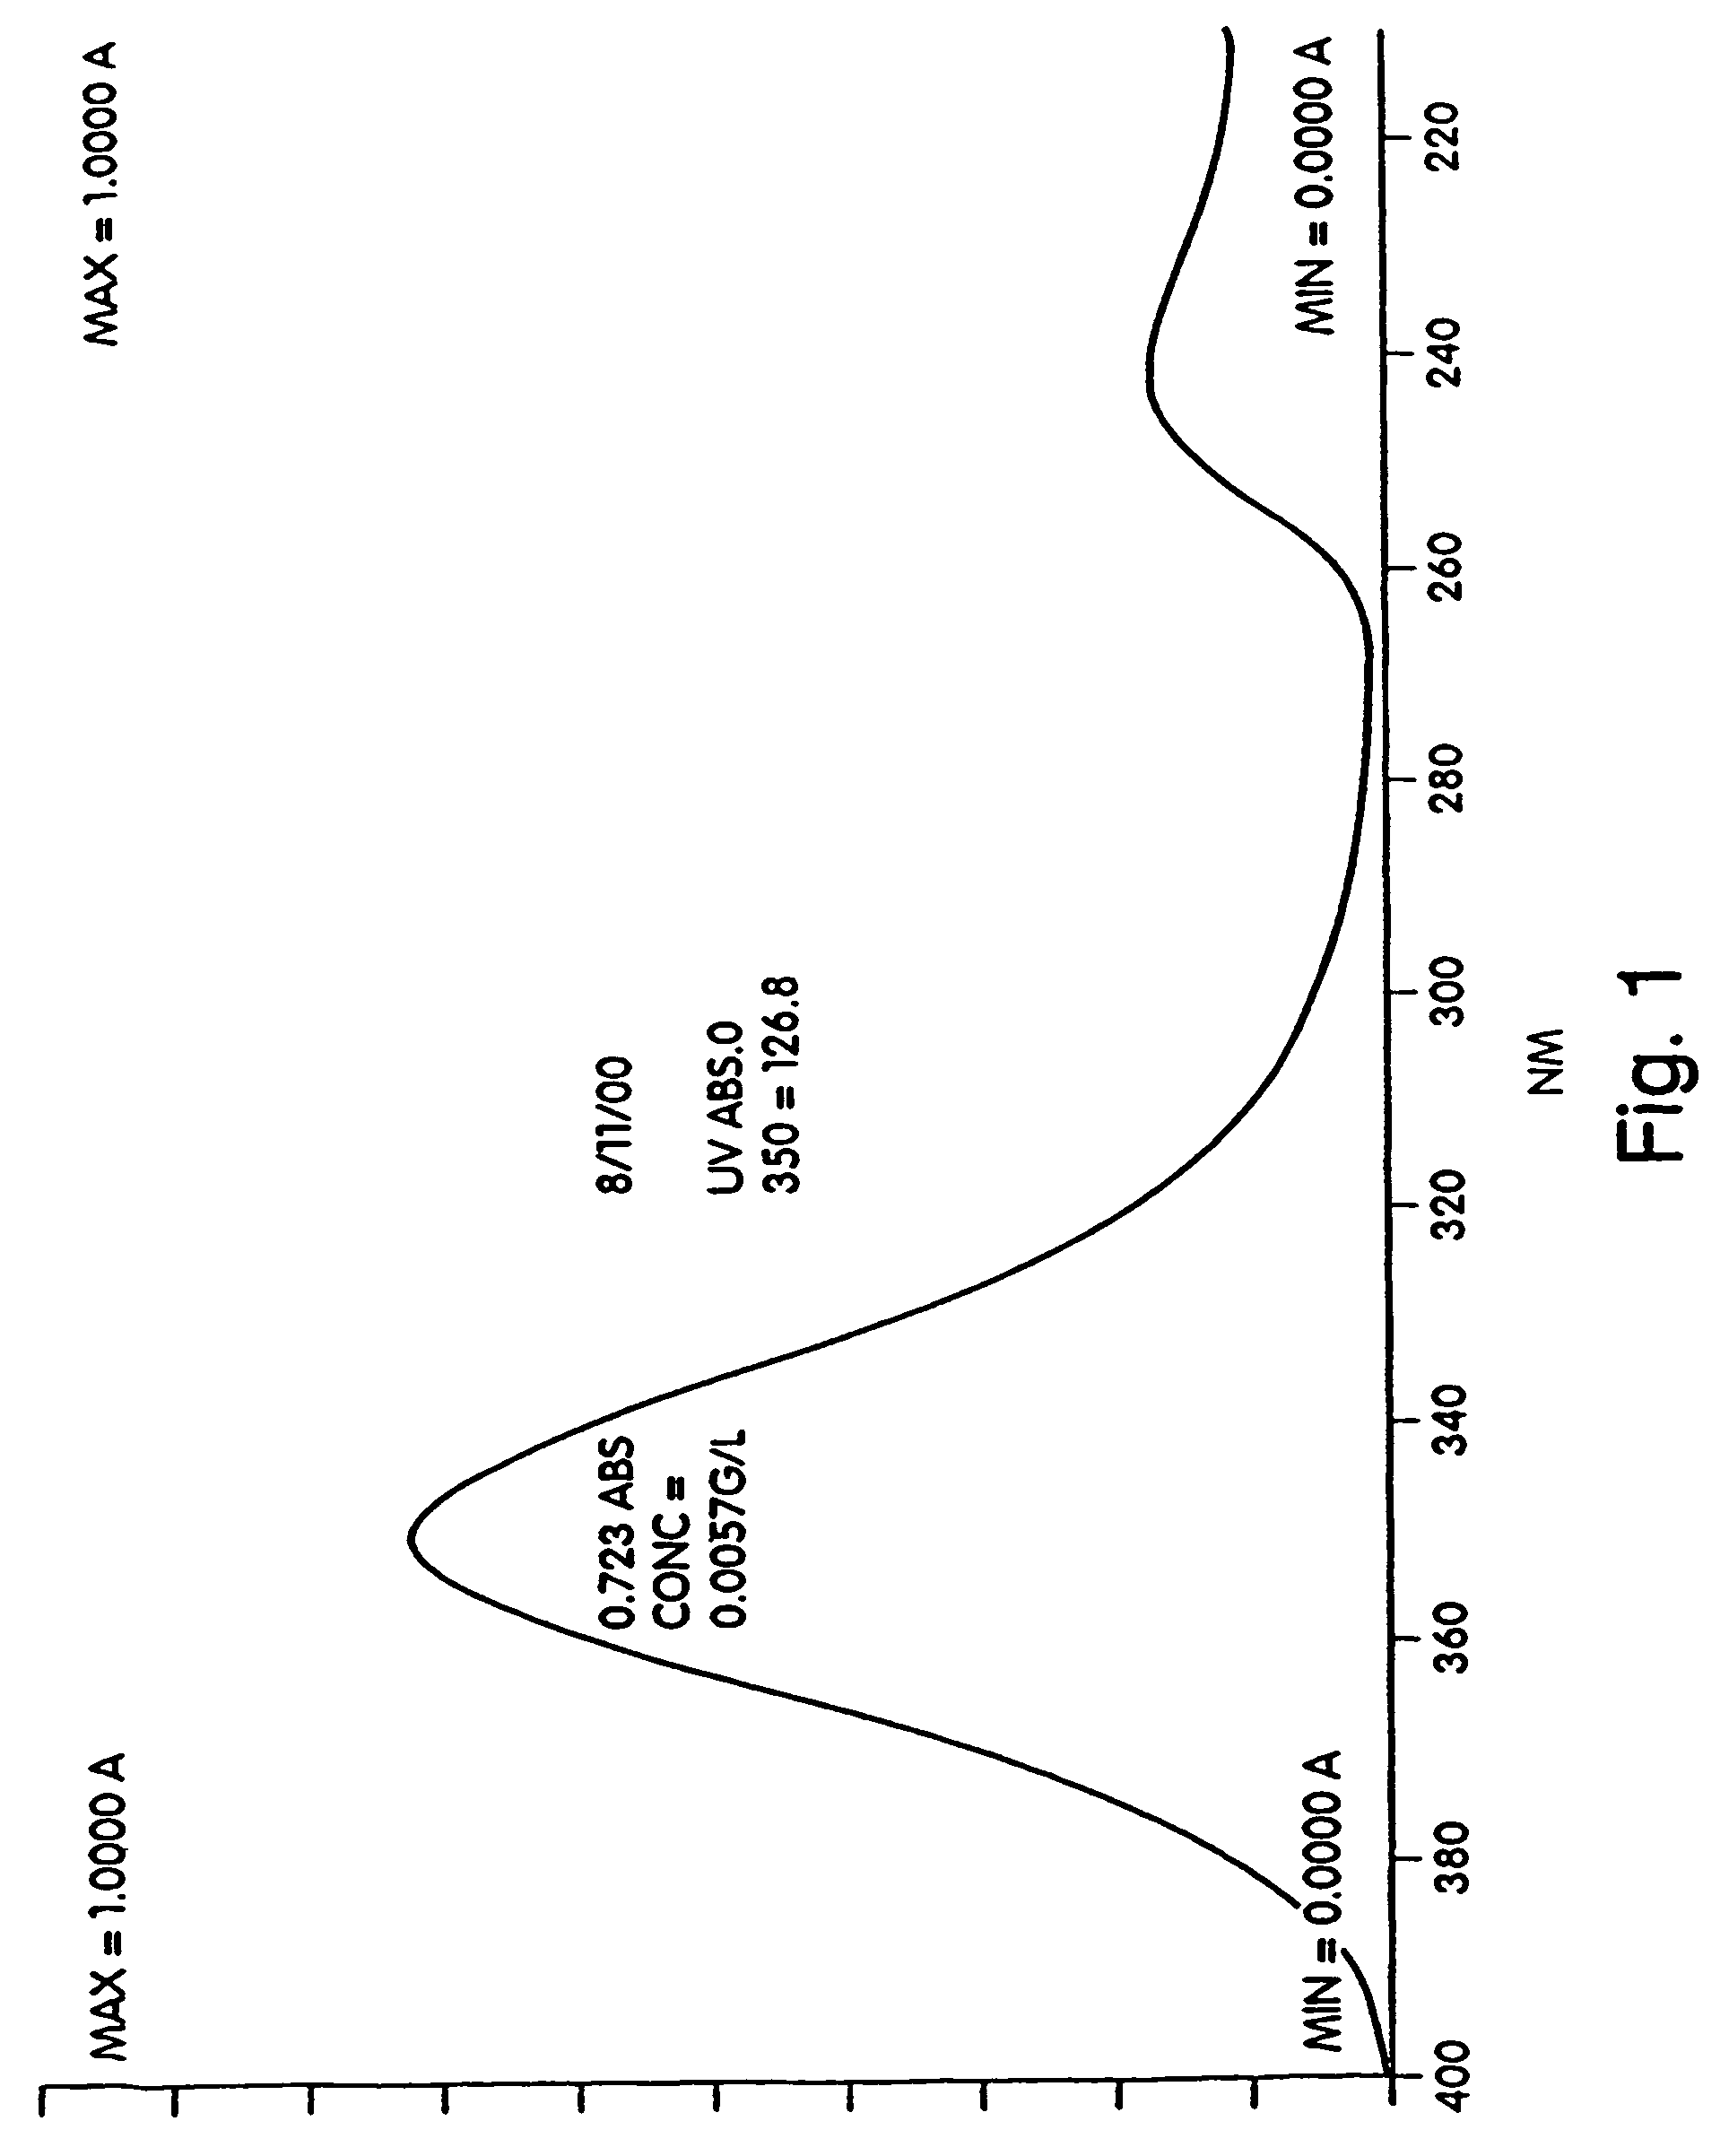 Sunscreen compositions and methods of use thereof